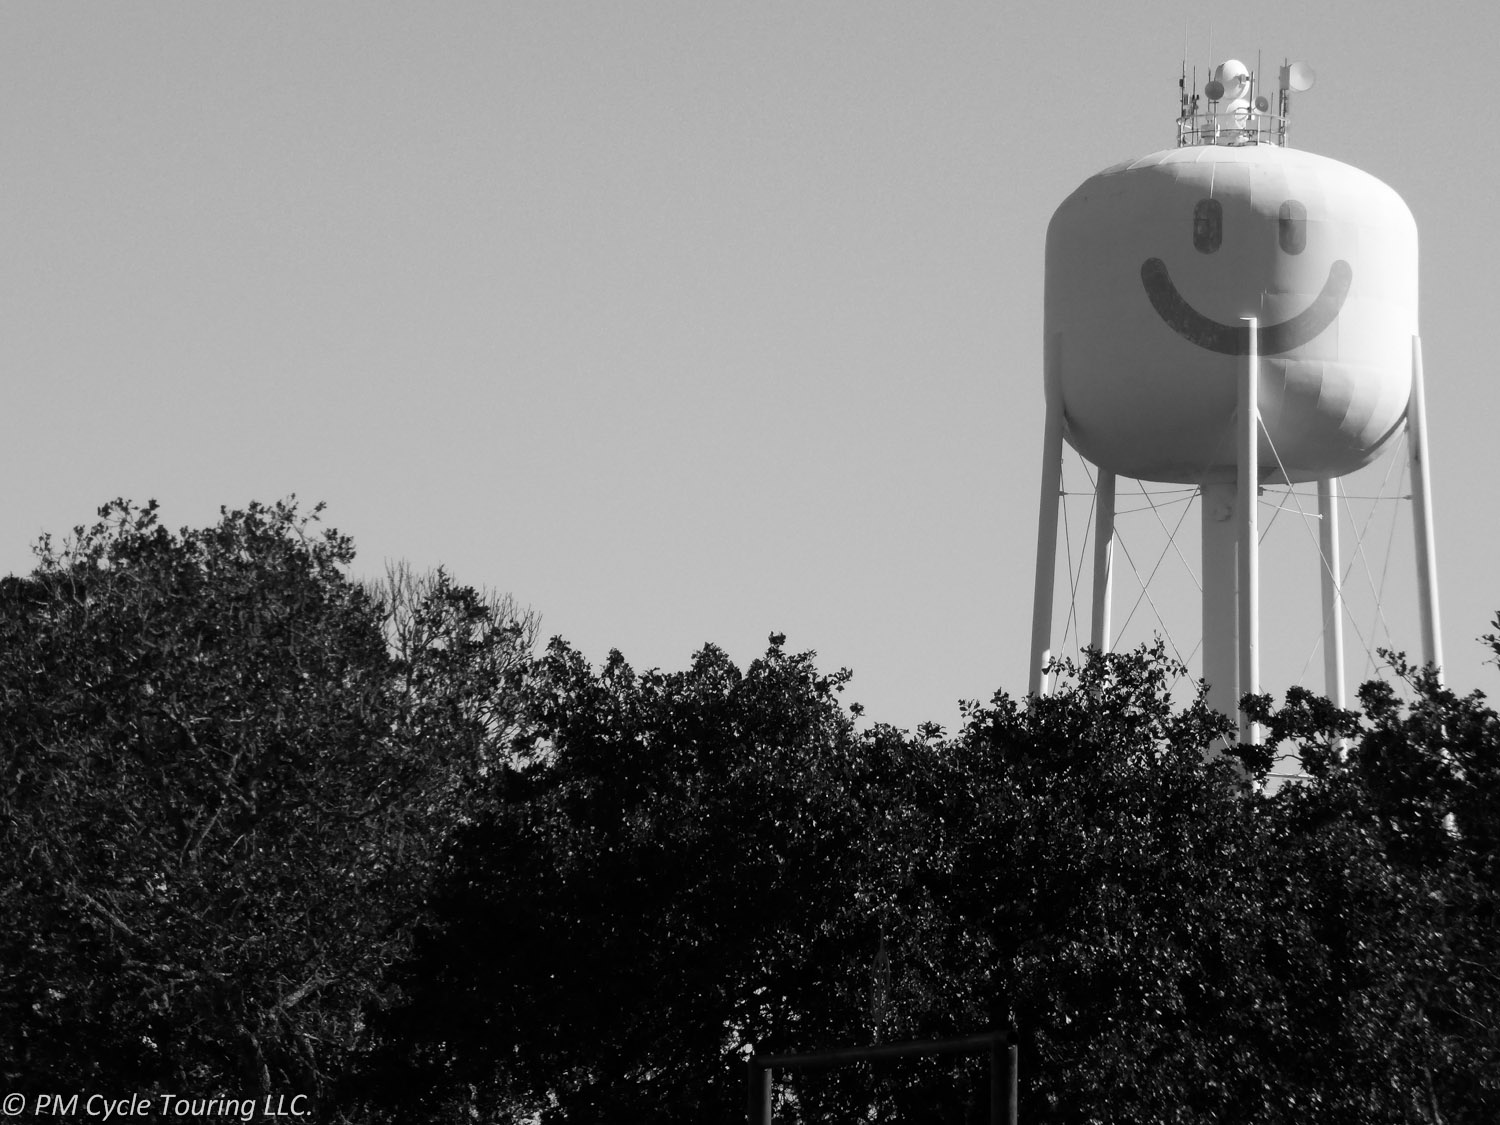 A water tower with a painted smiley face rises above the trees.